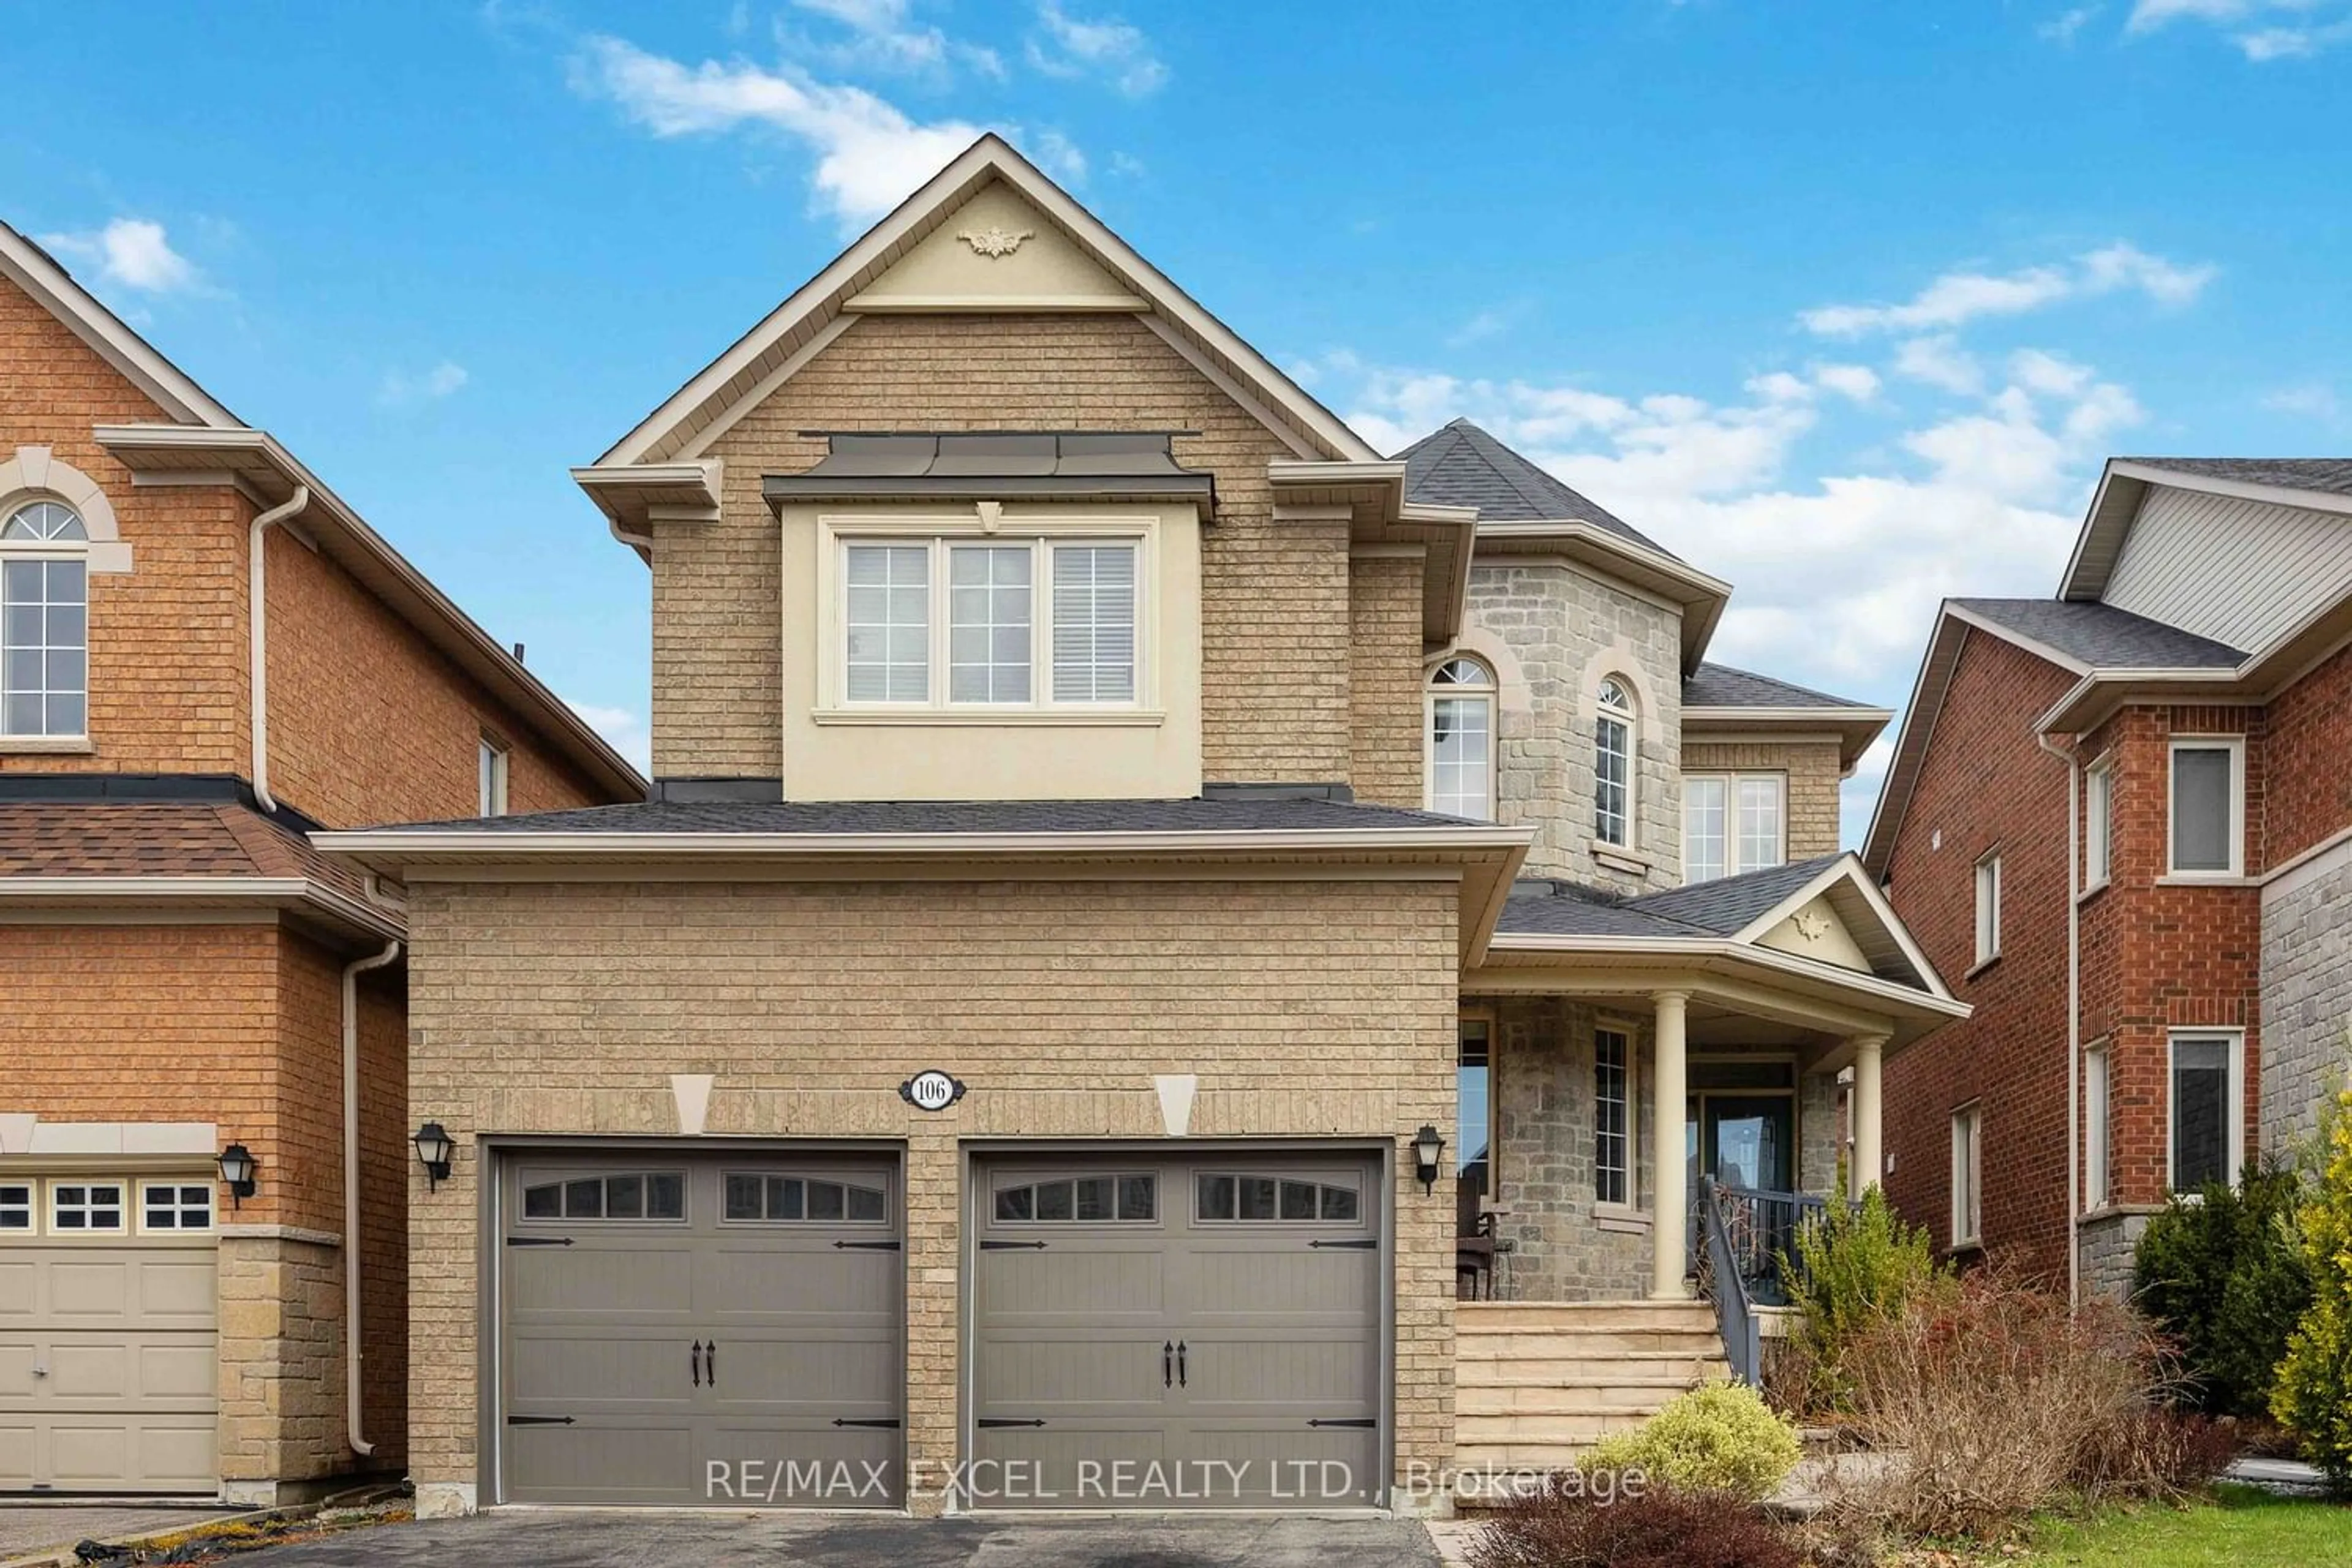 Home with brick exterior material for 106 Jefferson Forest Dr, Richmond Hill Ontario L4E 4J4